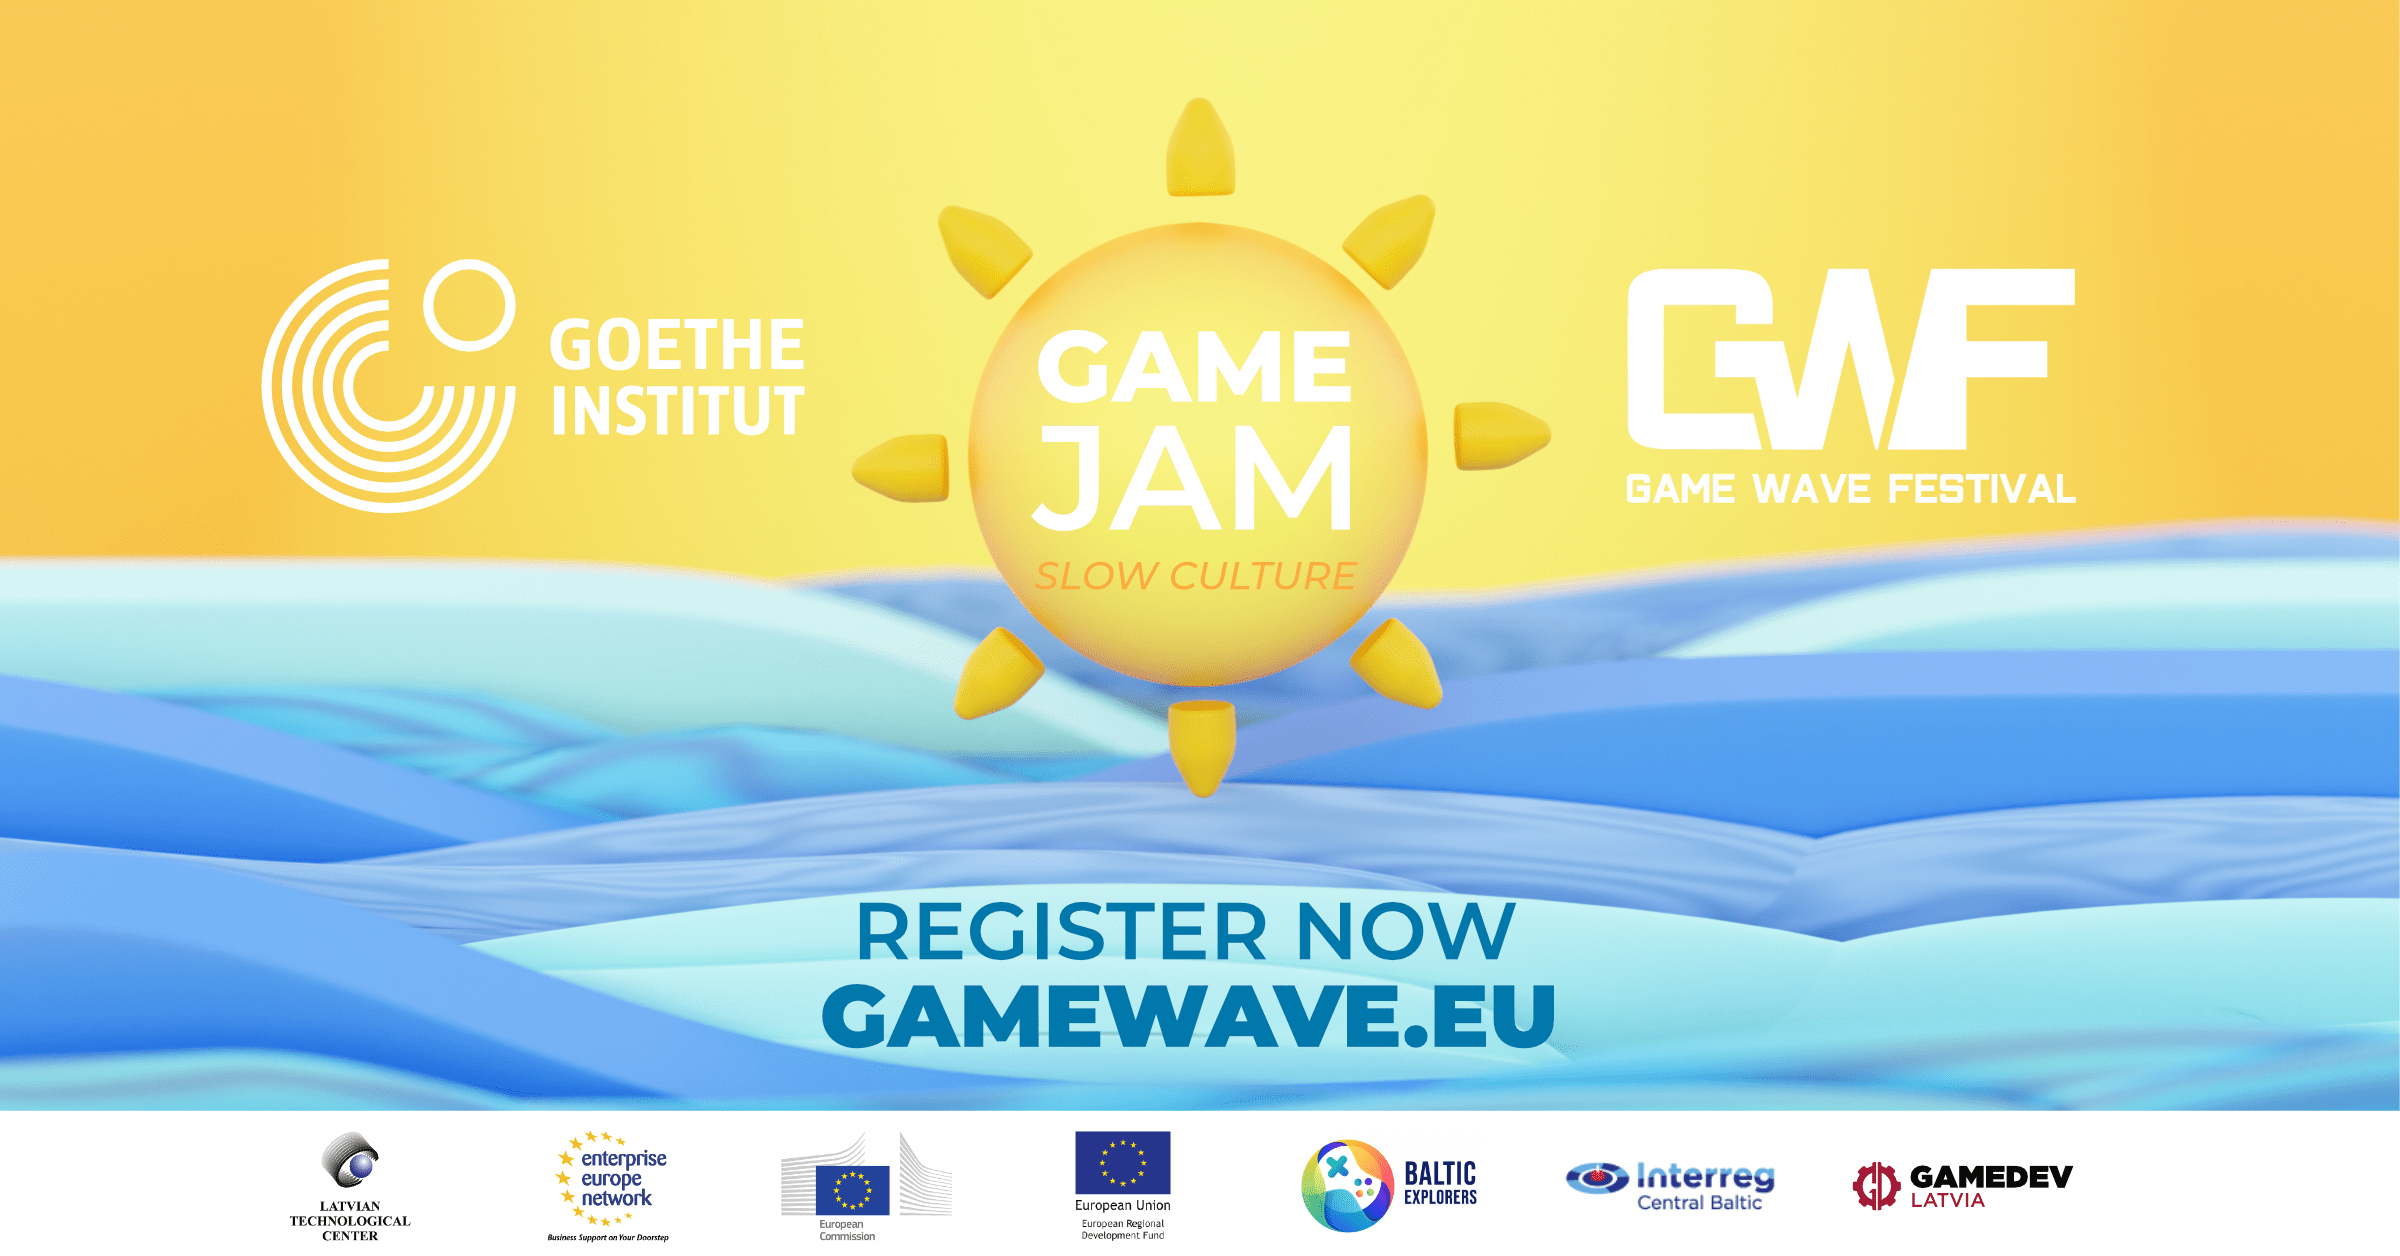 Game Wave Festival